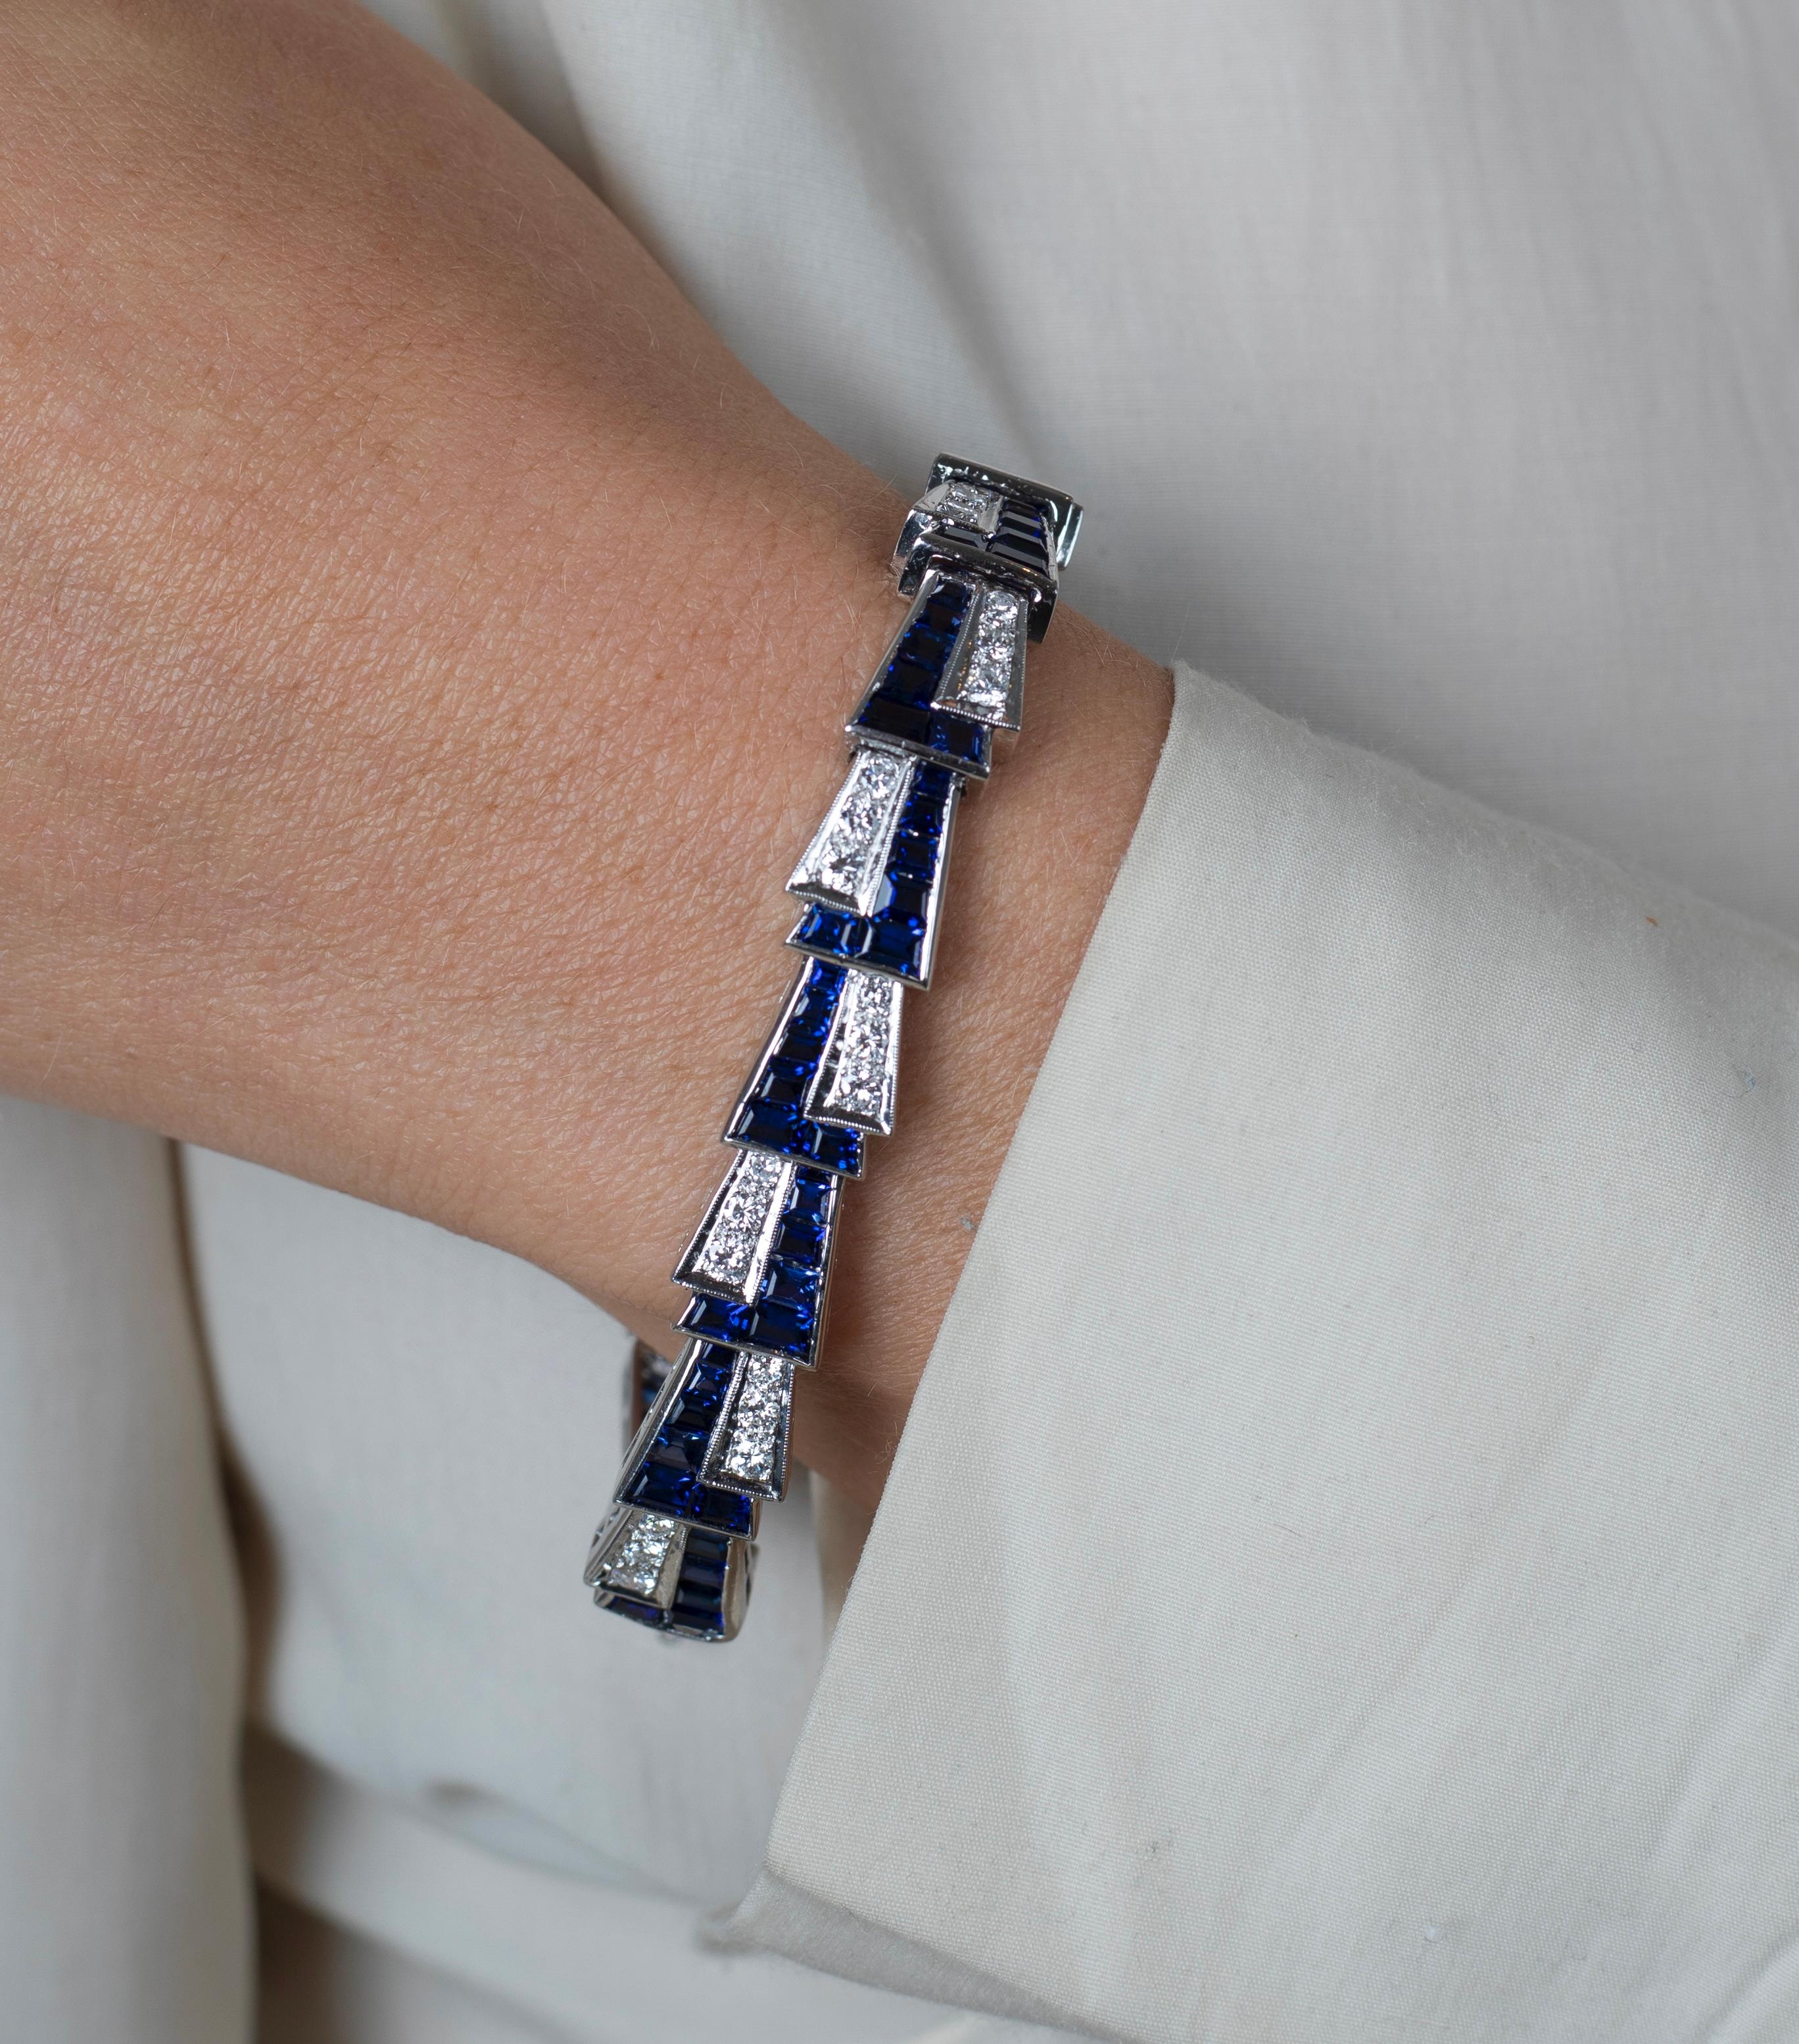 Introducing a vintage 19-carat total weight square baguette cut blue sapphire and round cut diamond platinum link bracelet. A true masterpiece of symmetry that exudes elegance and sophistication. With its stunning art deco-inspired design, this